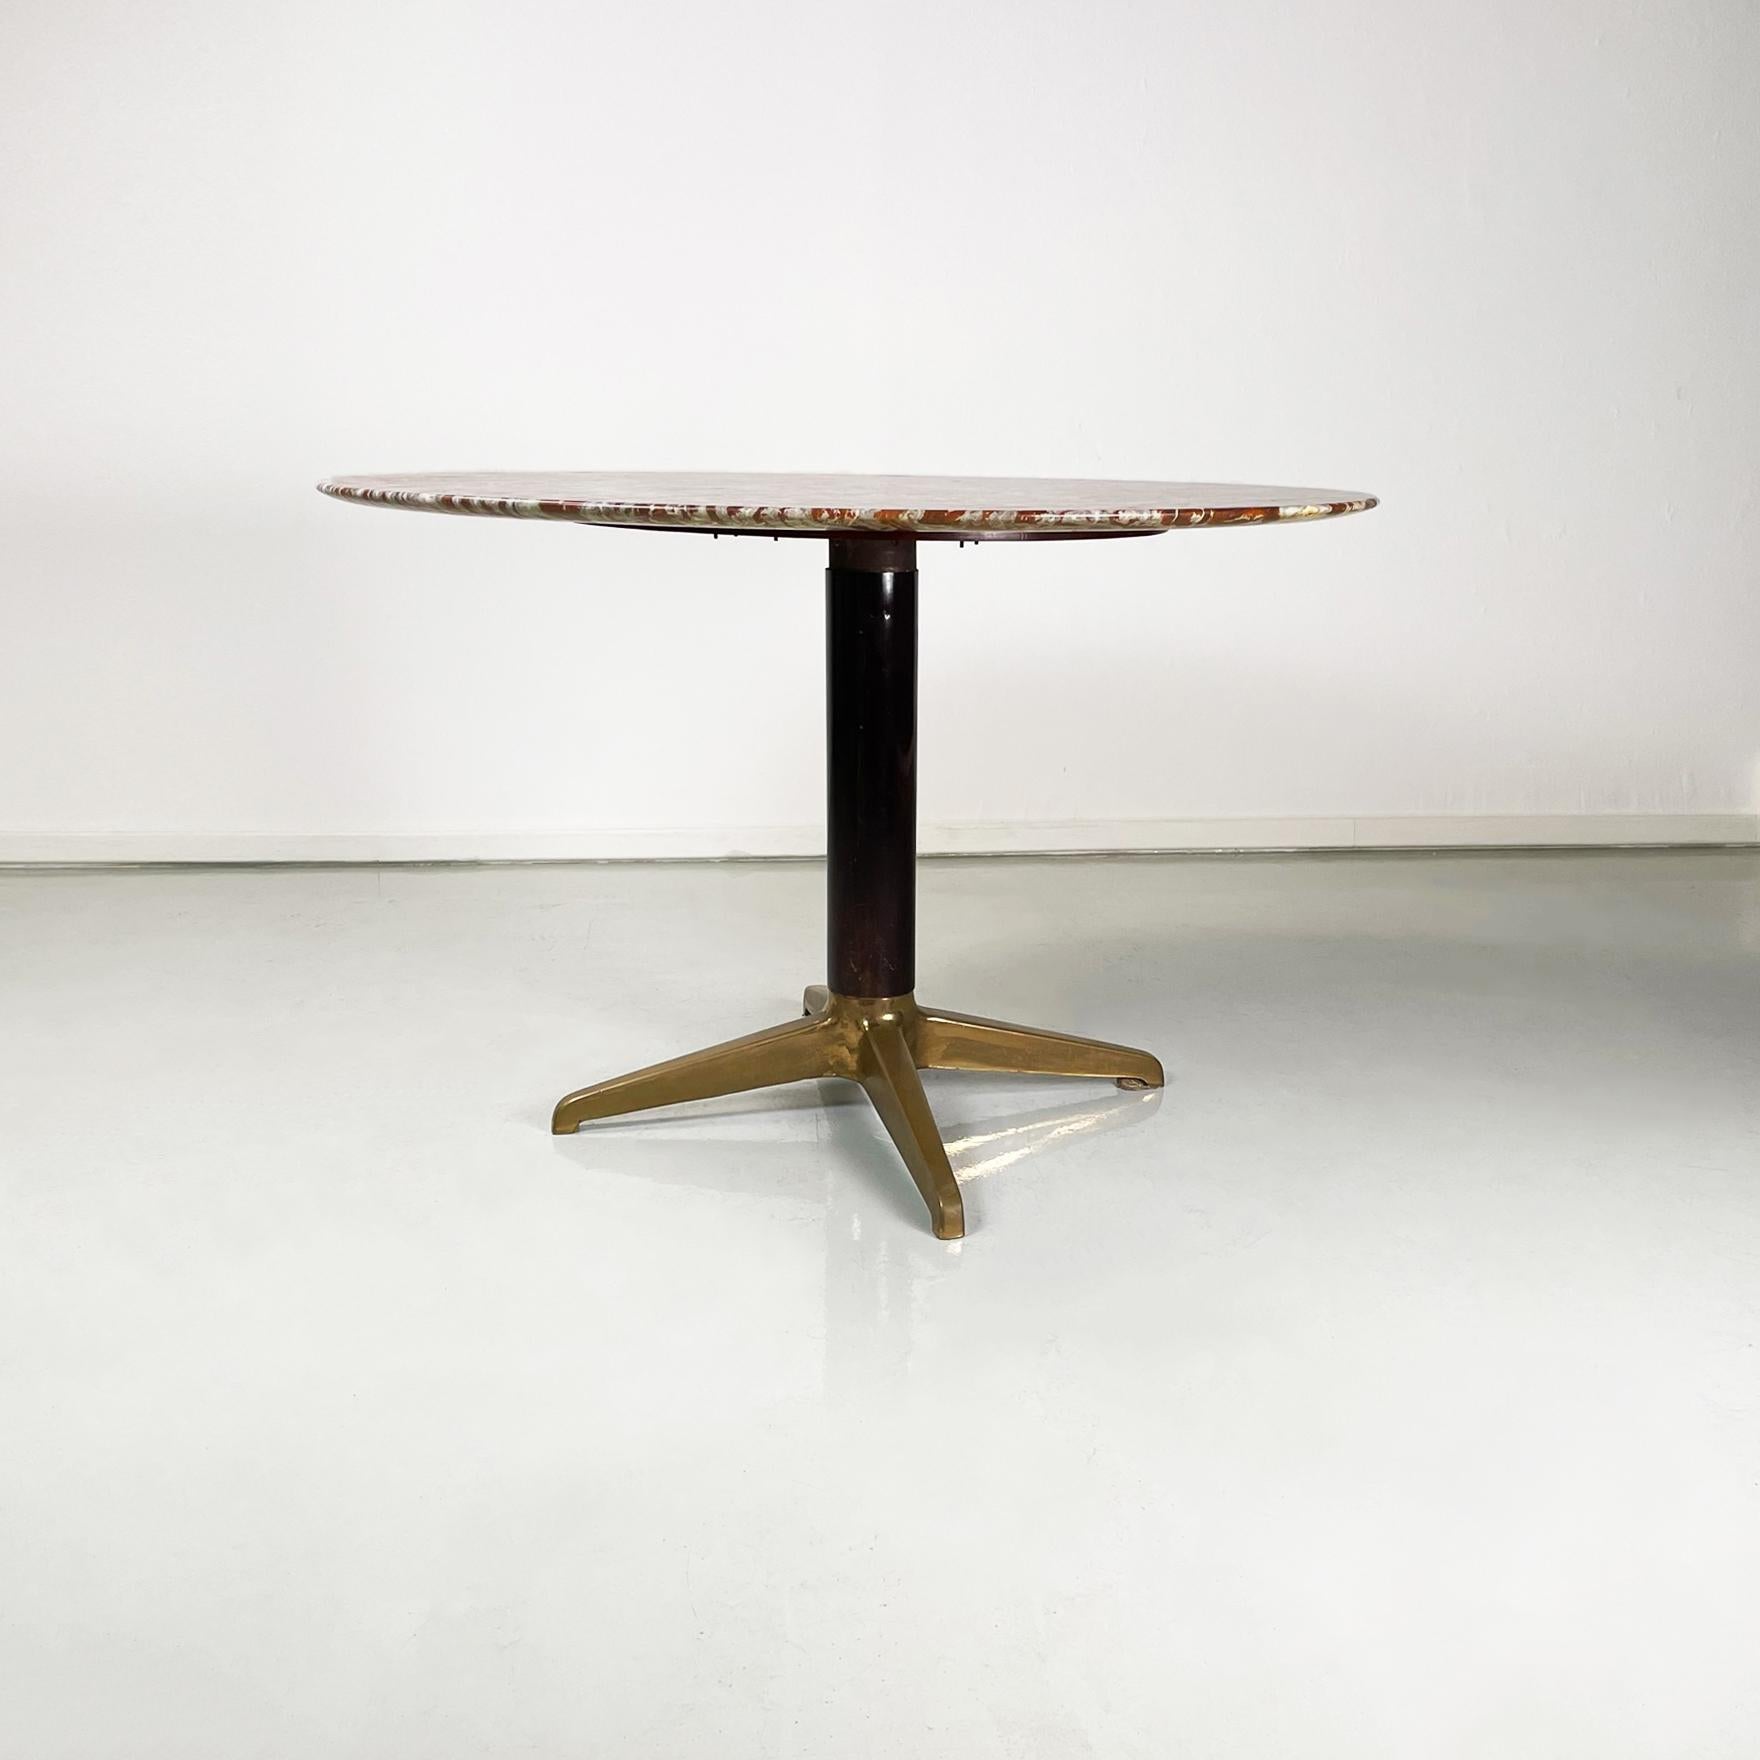 Italian mid-century Round dining table in red marble, black wood and brass, 1950s
Fantastic dining table with round thin top in red and white marble. The central leg is in black painted wood and ends with 4 brass spokes.
1950s
Very good